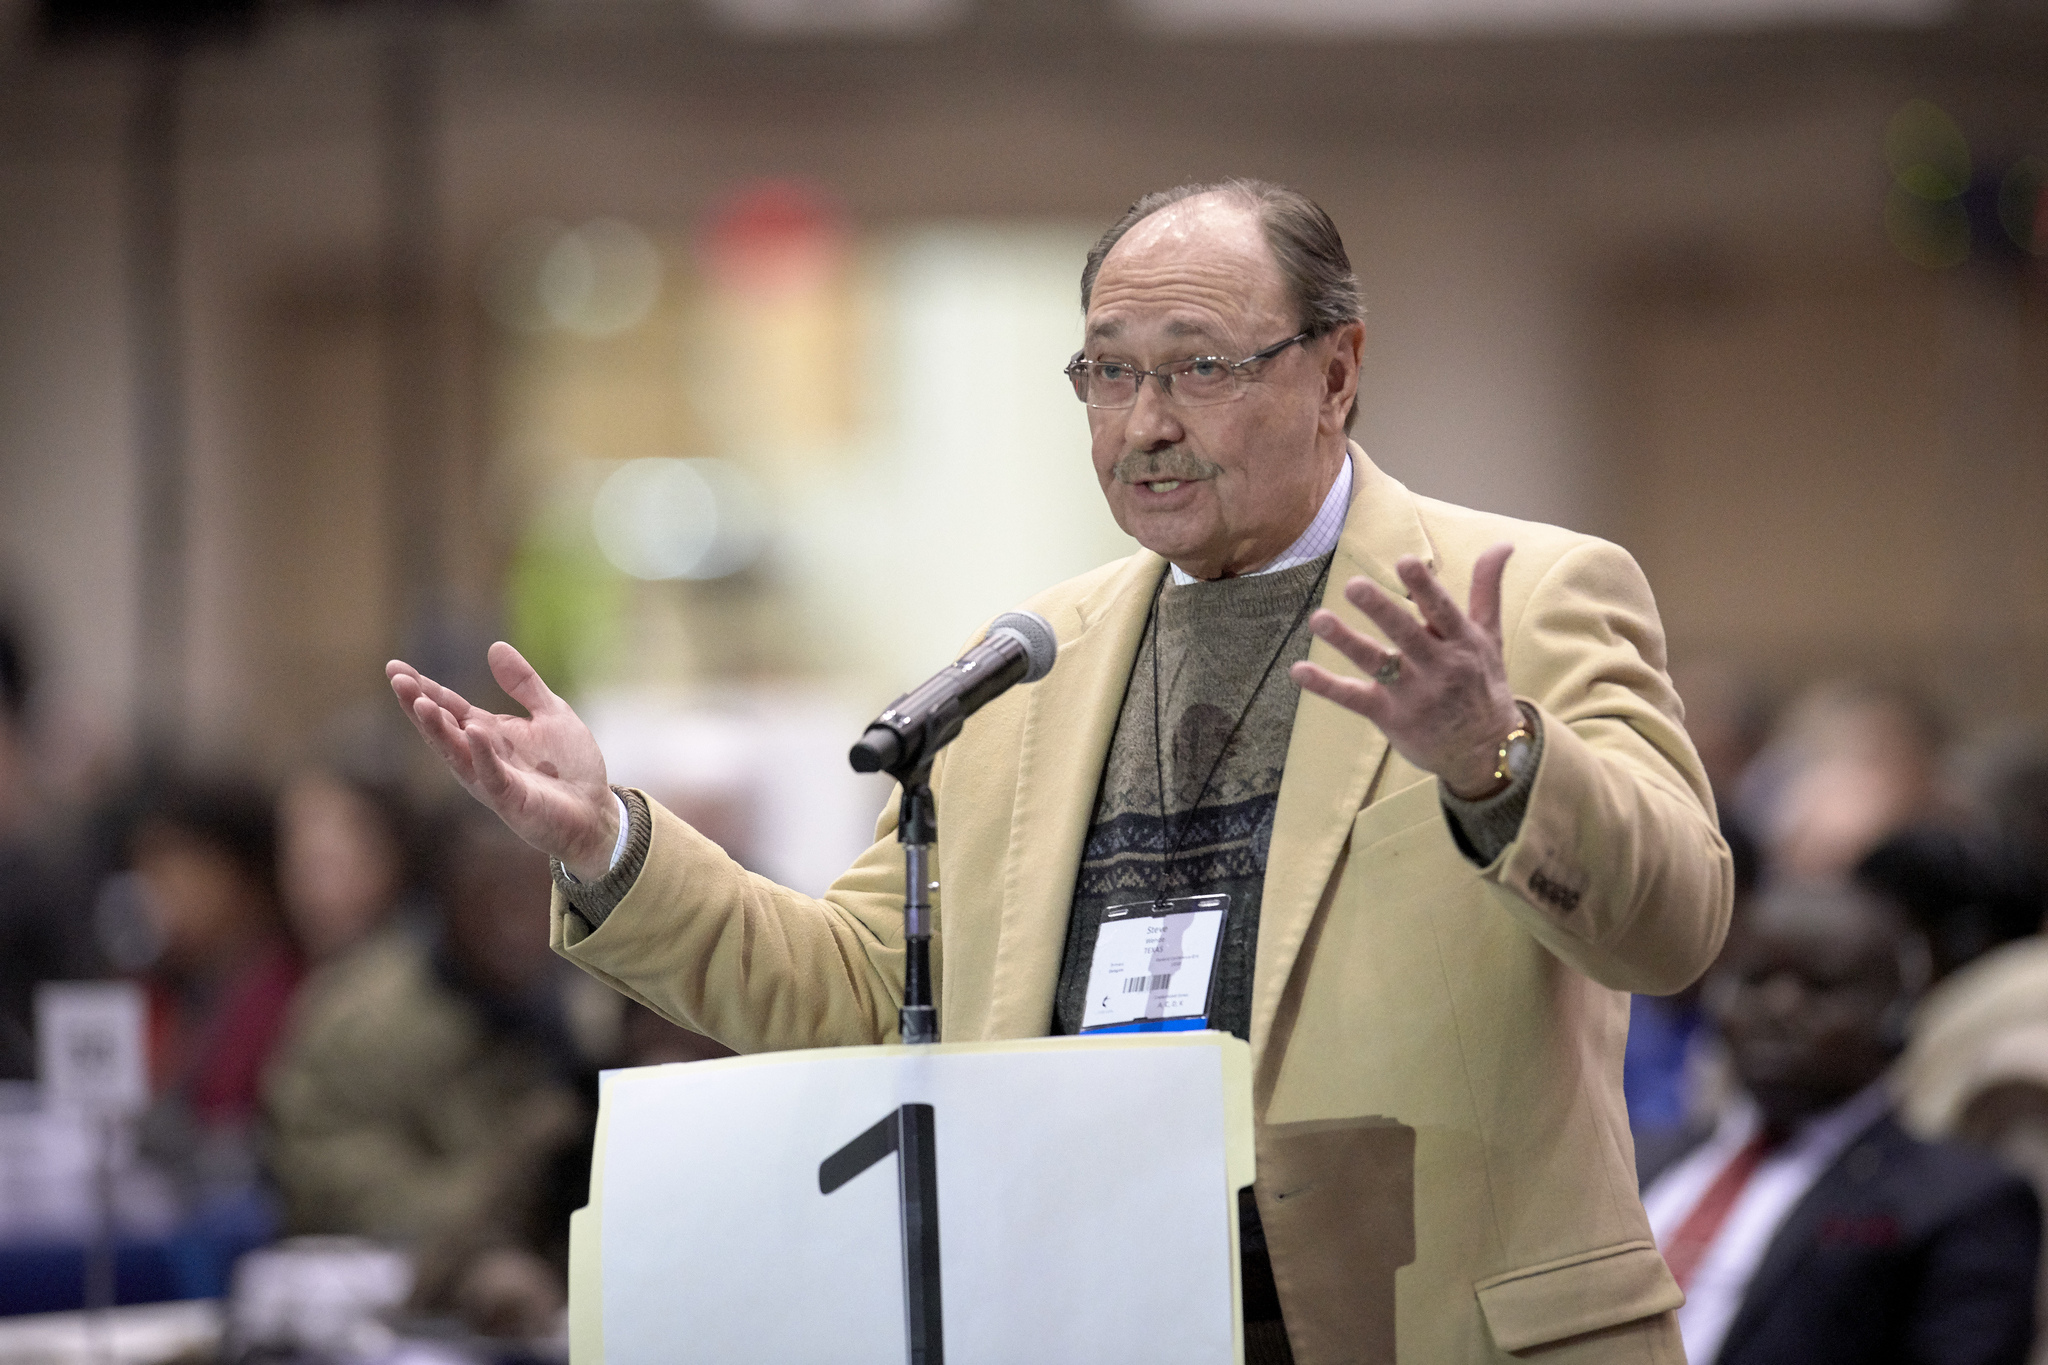 The Rev. Stephen Wende, a delegate from the Texas Conference, speaks at the 2019 United Methodist General Conference in St. Louis. Wende spoke against postponing a discussion of the Traditional Plan, which he supports. Photo by Paul Jeffrey, UMNS.